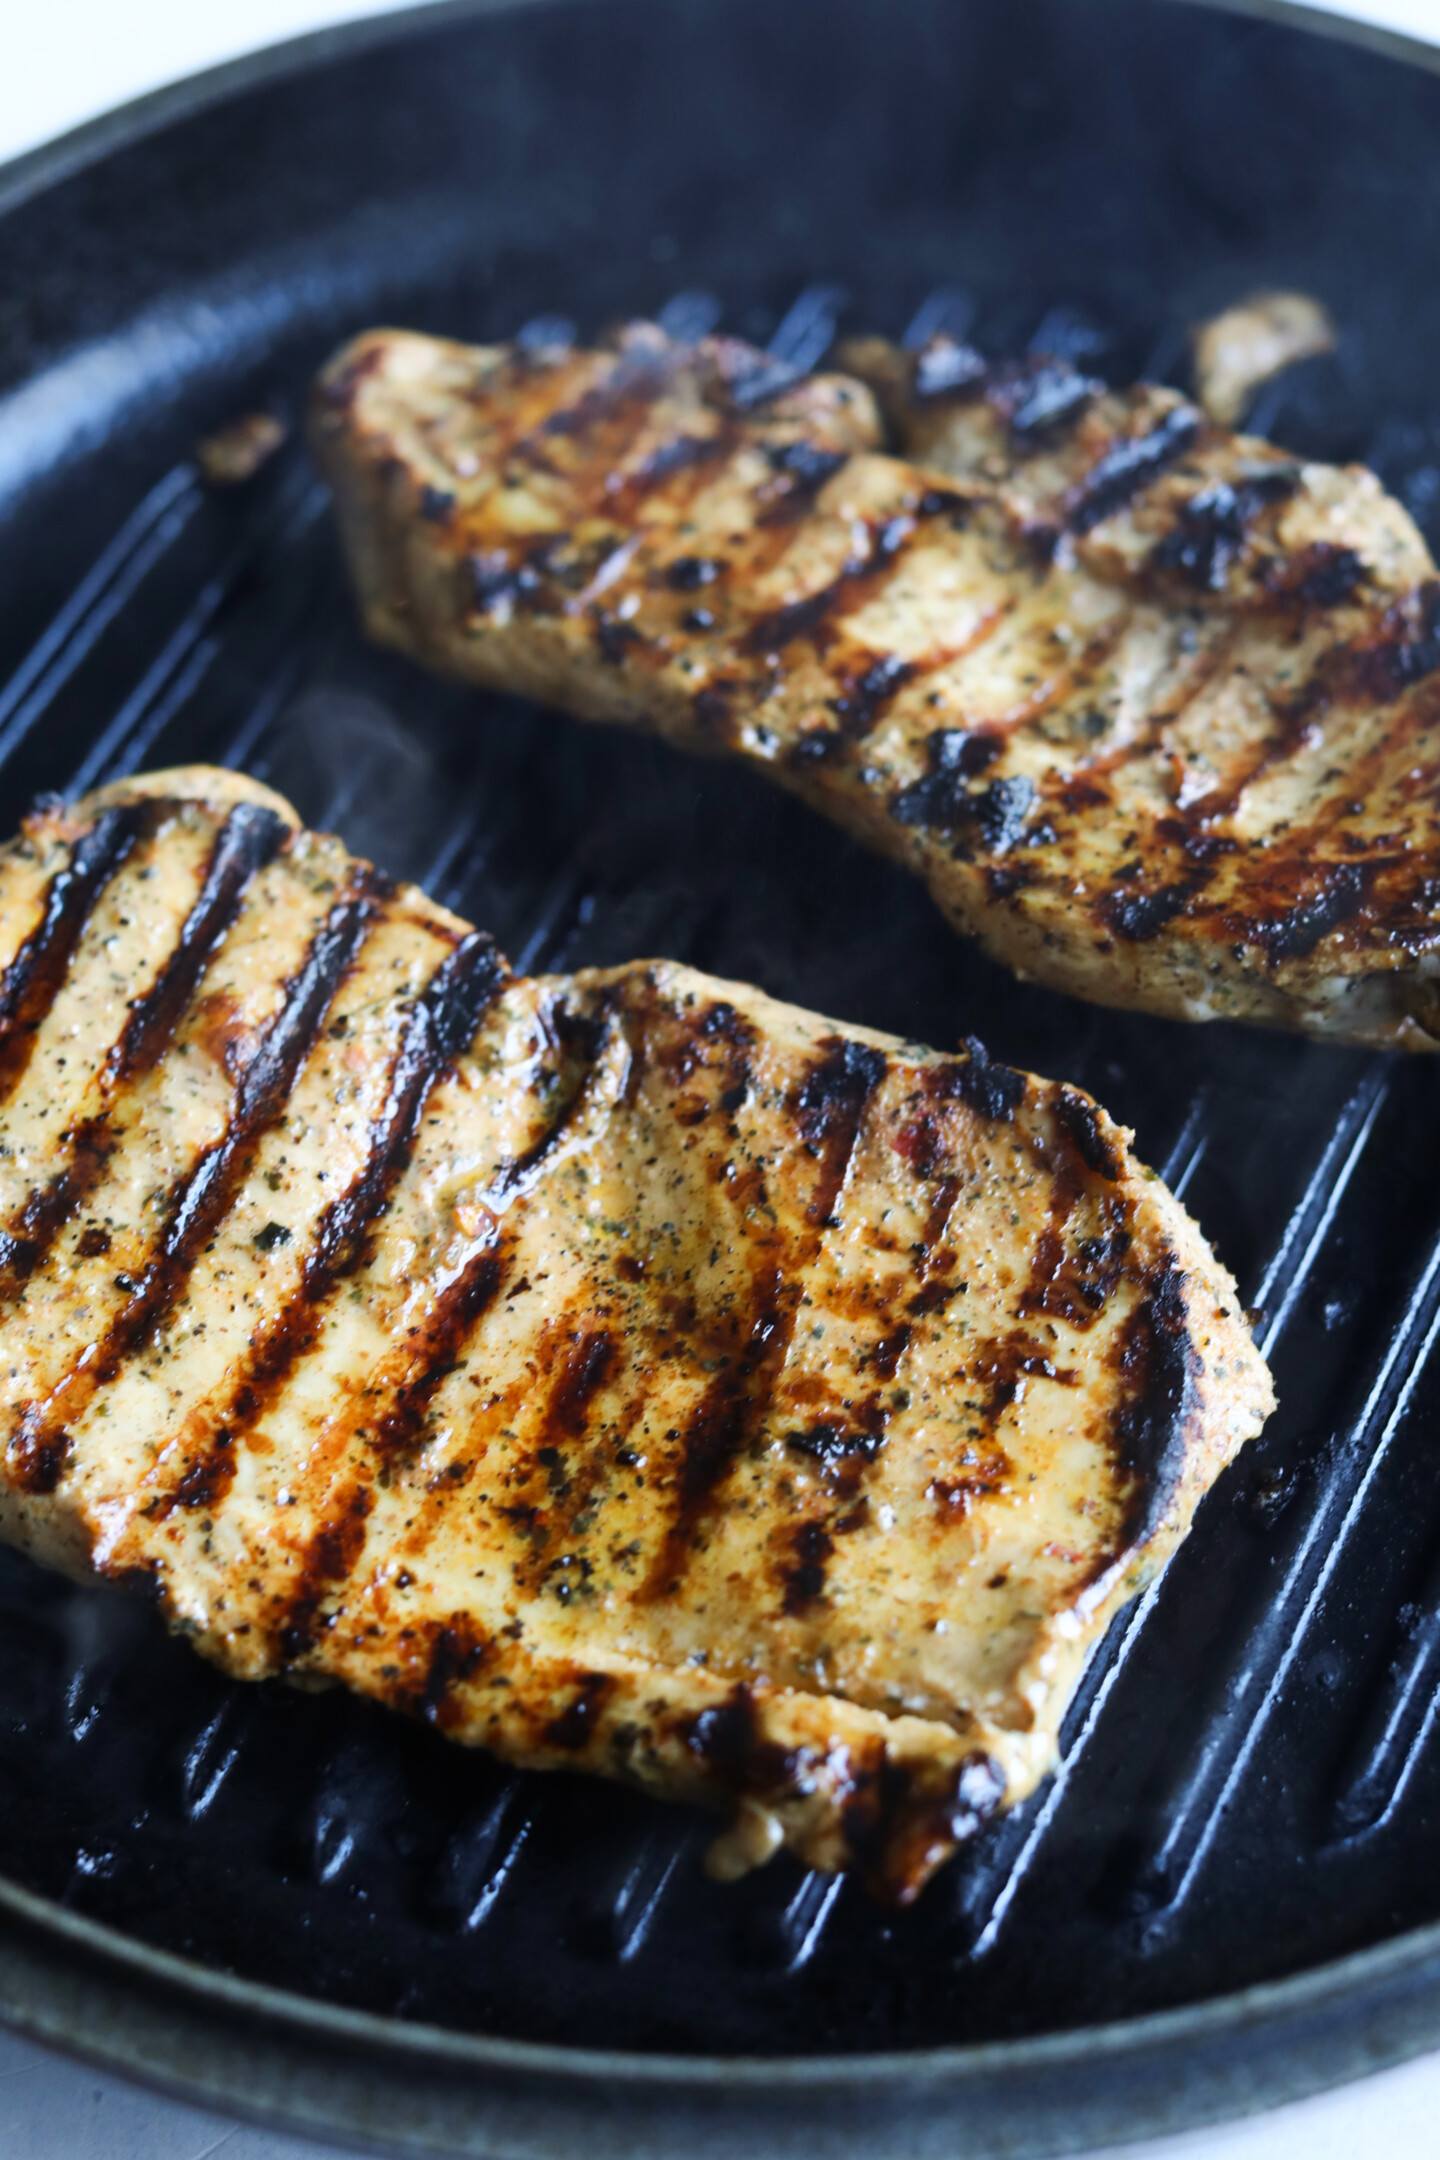 Grilled chicken breasts in black iron skillet.